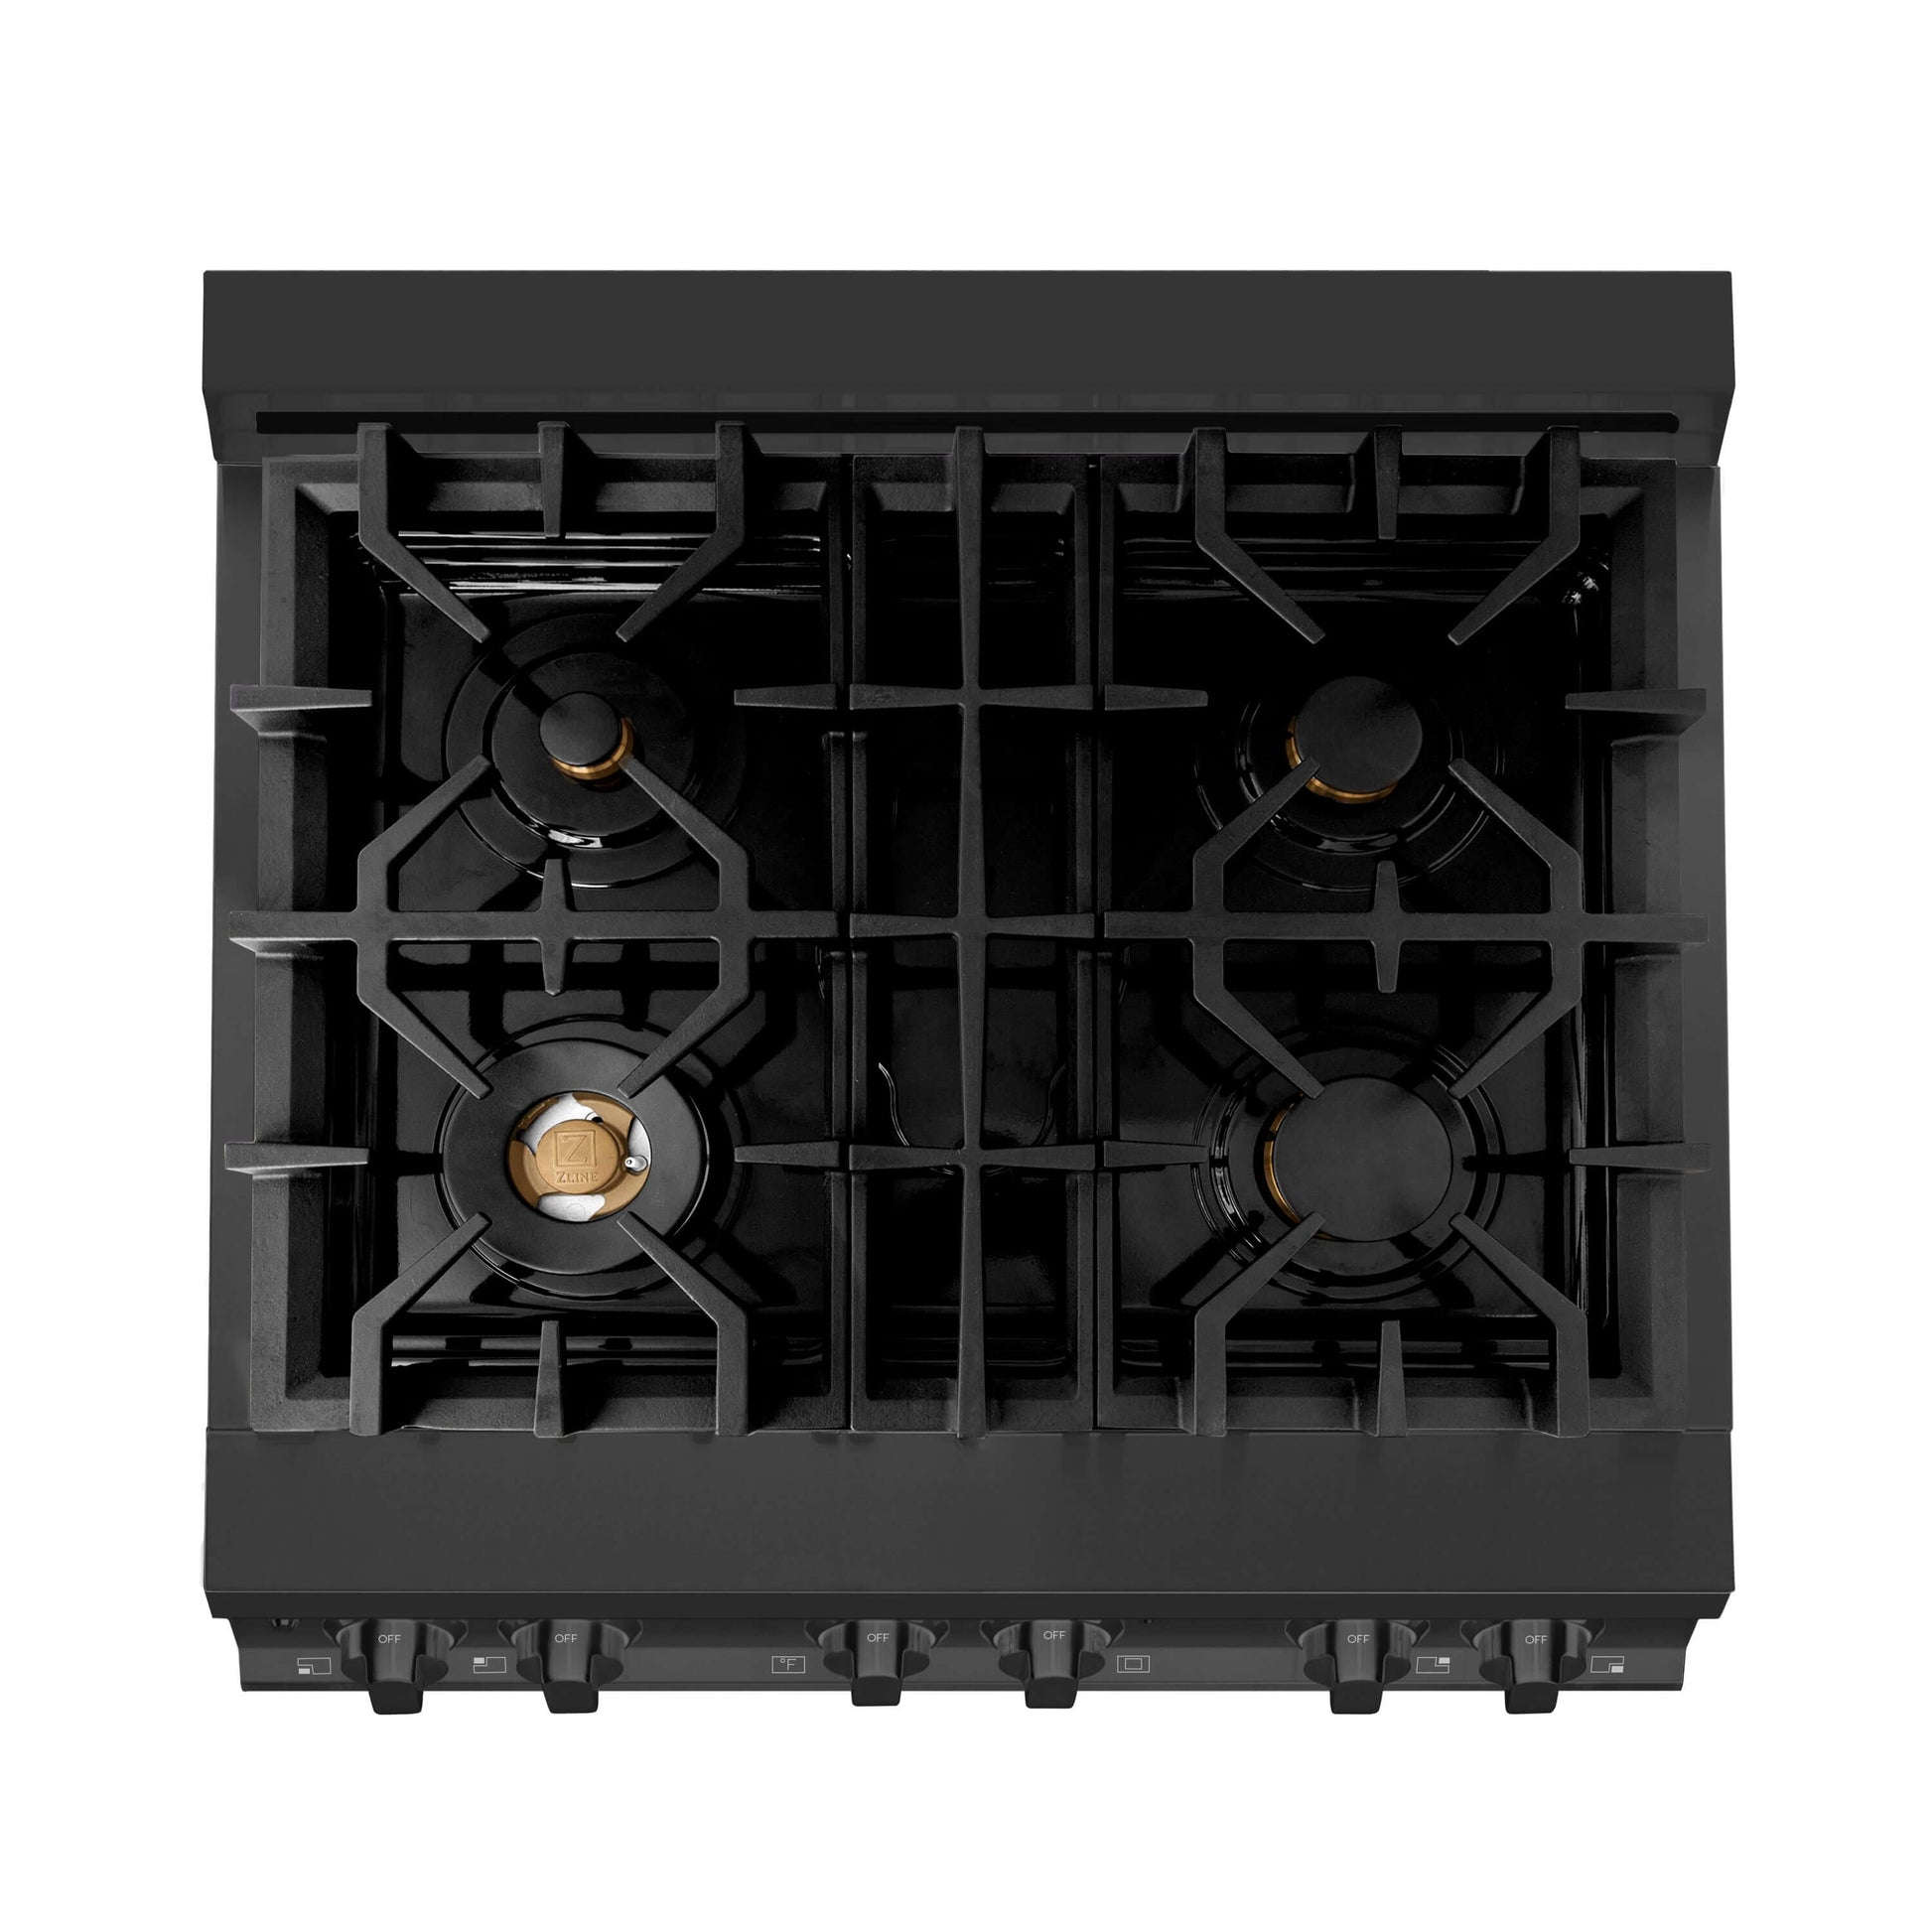 ZLINE 30" Dual Fuel Range with Gas Stove and Electric Oven - Black Stainless Steel with Brass Burners